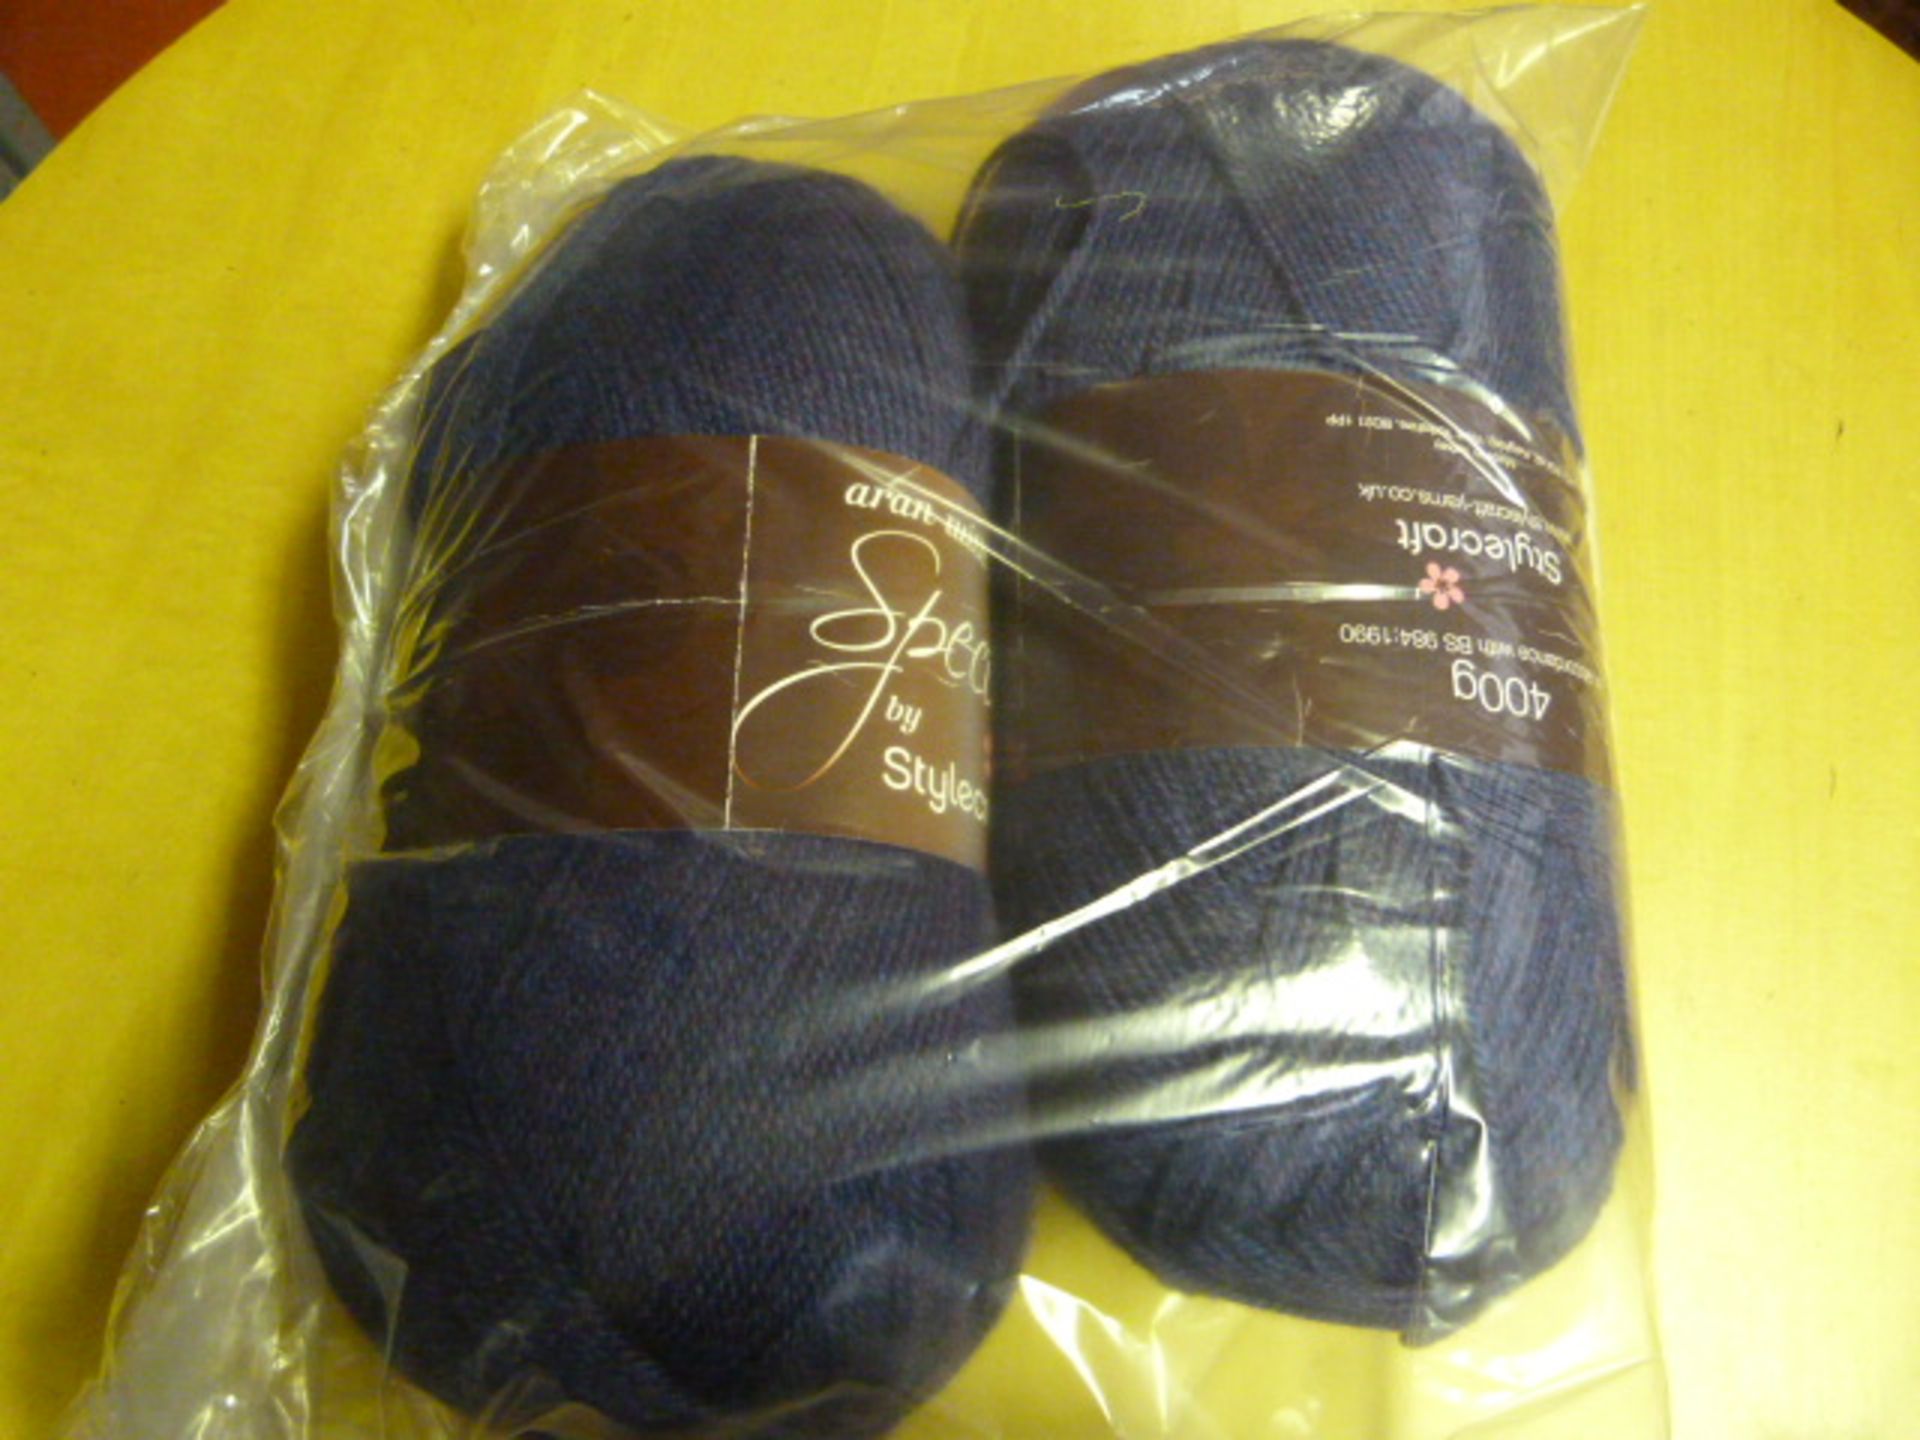 Two Large Rolls of Blue Heather Wool